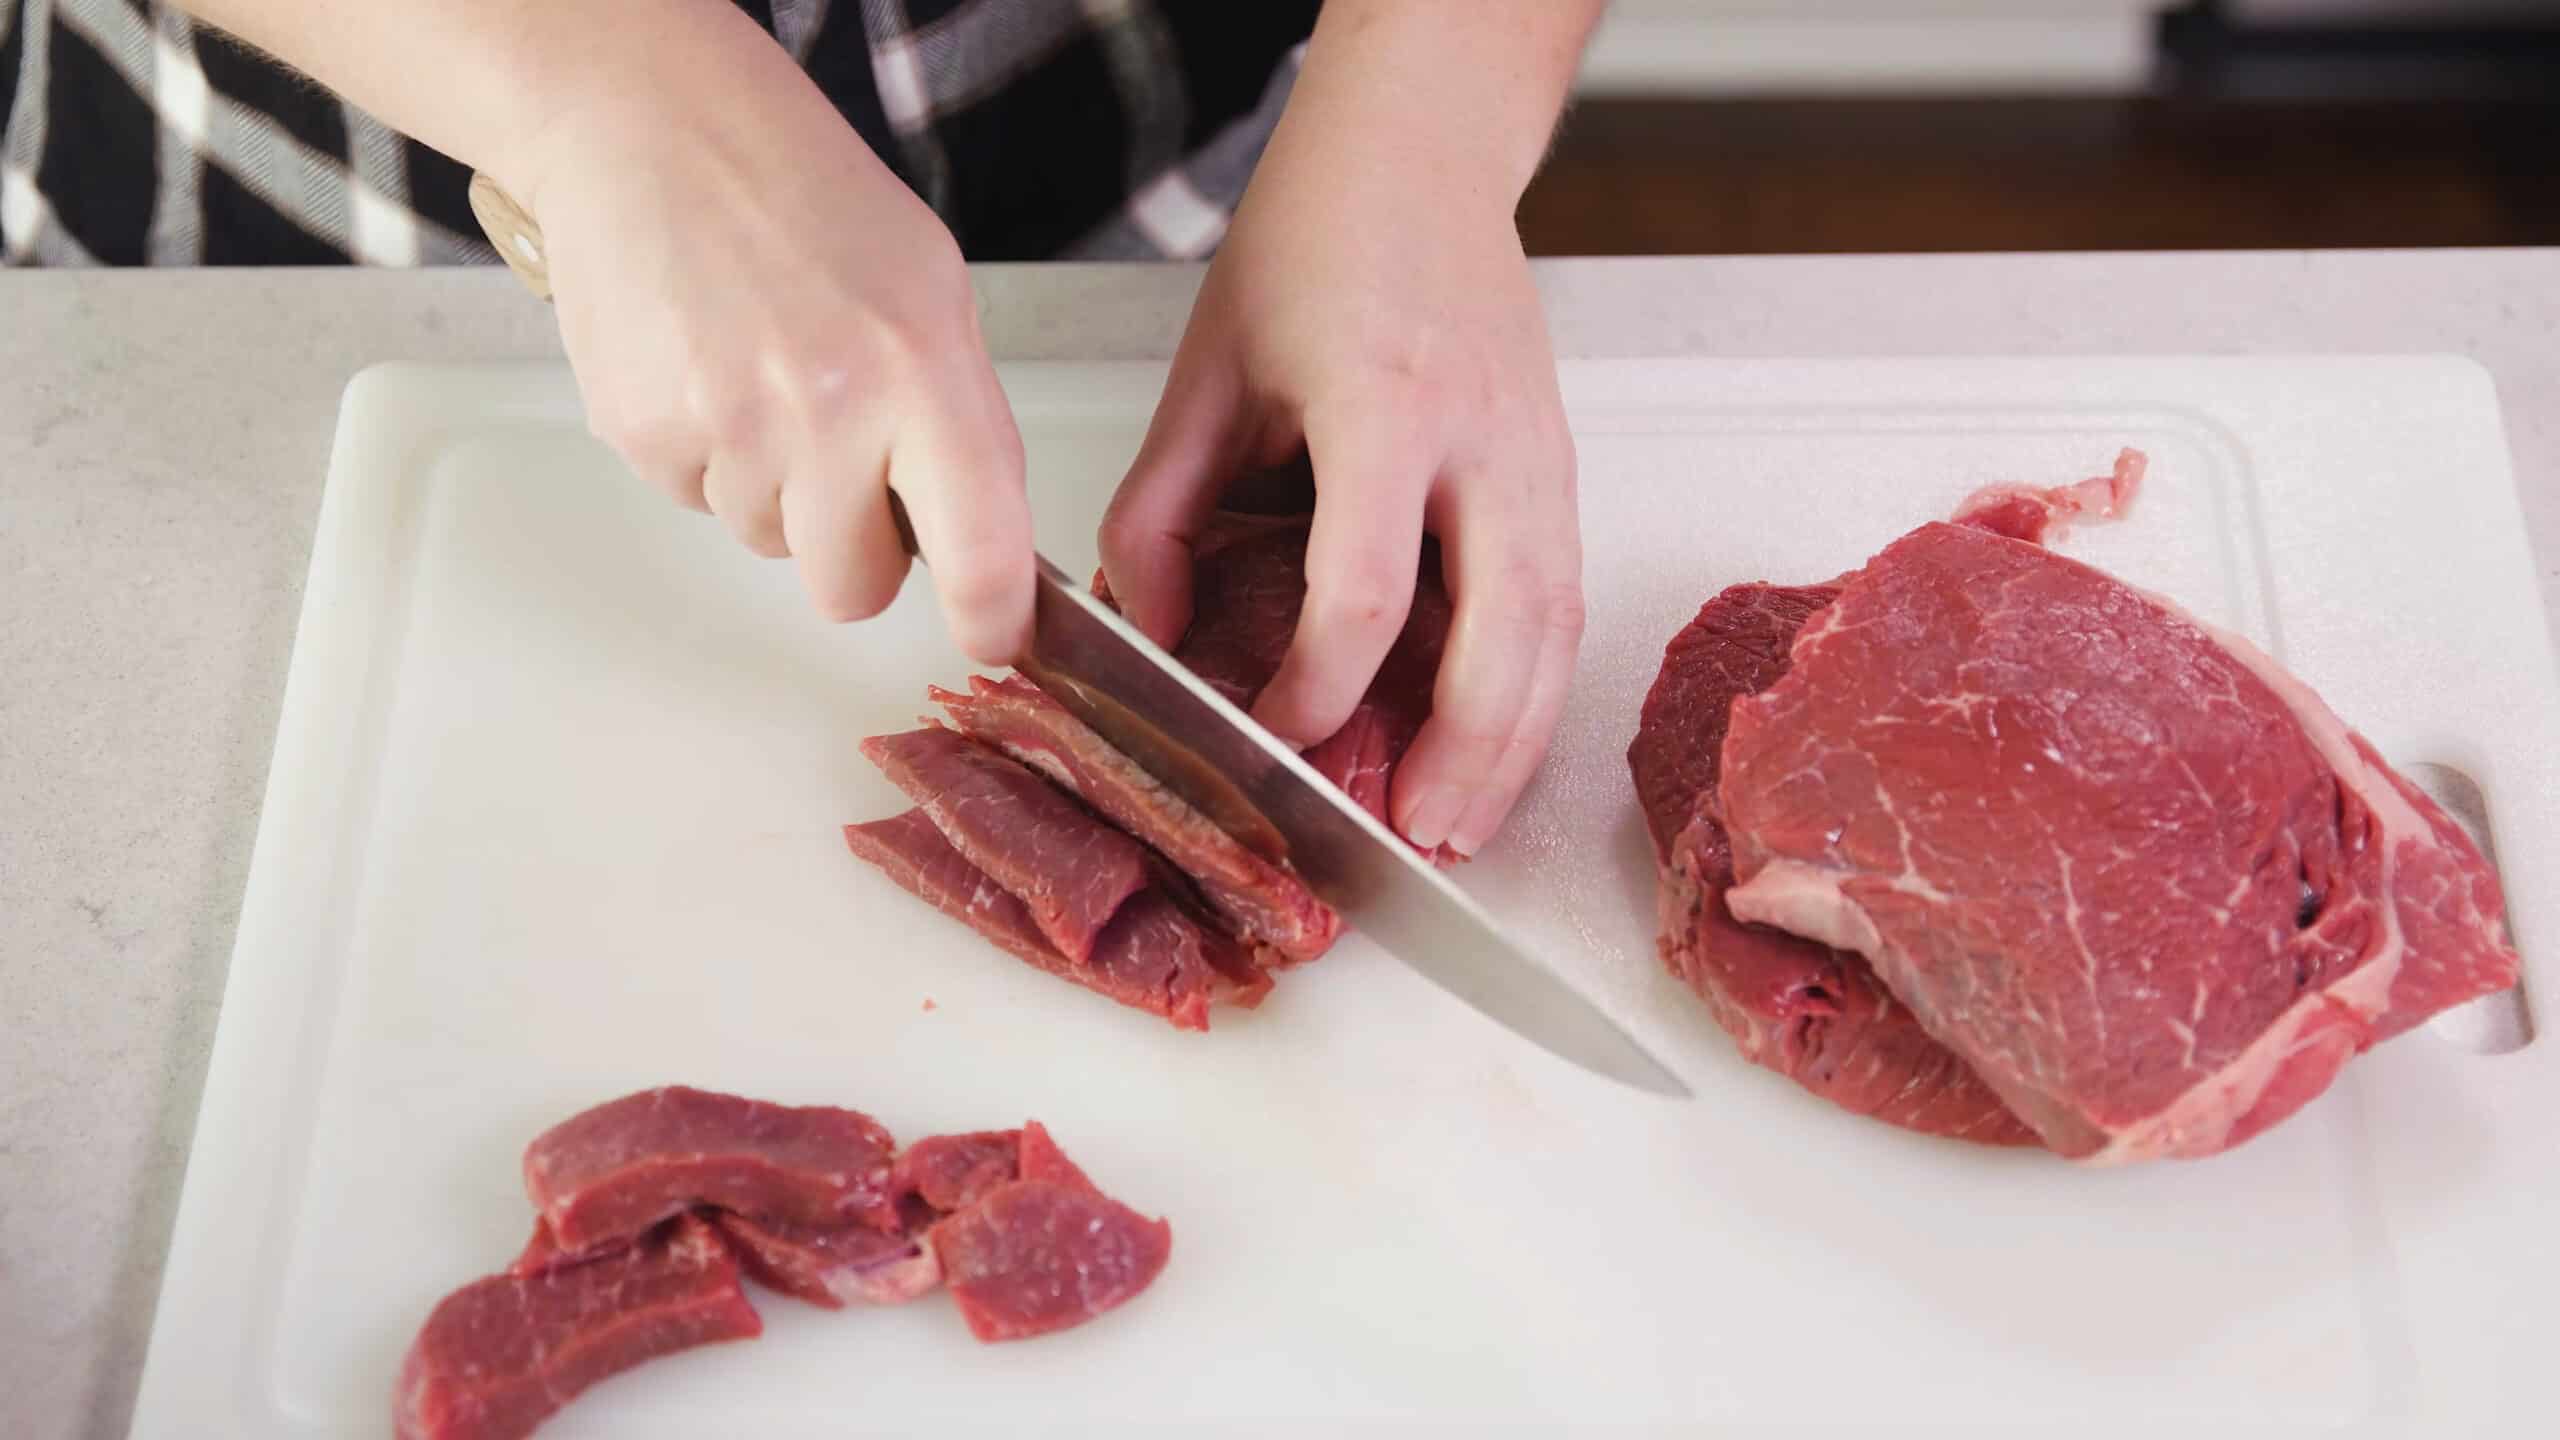 Overhead view of raw beef sirloin being cut with a kitchen knife into strips on a clean cutting board.